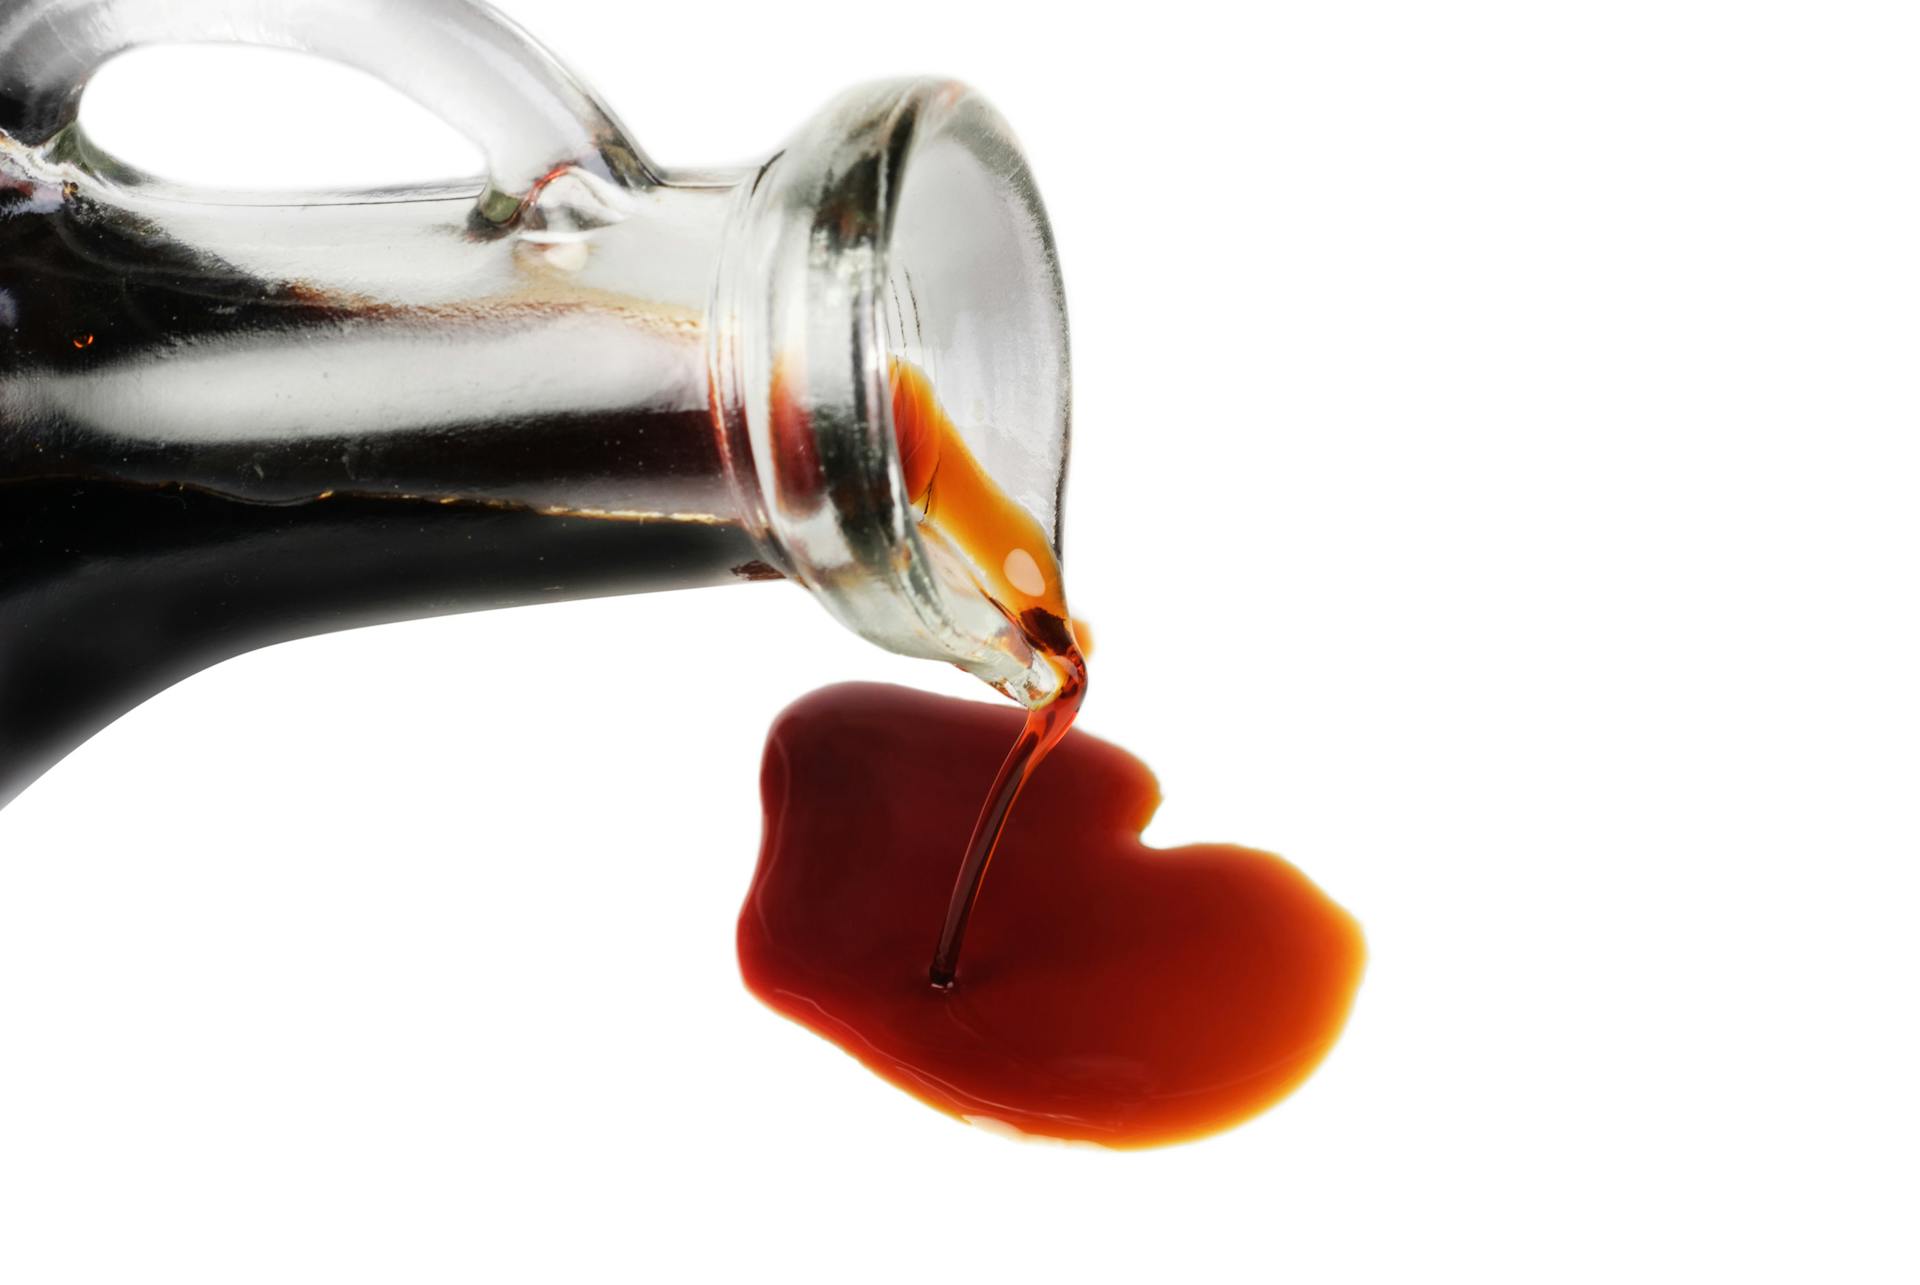 Soy sauce being poured